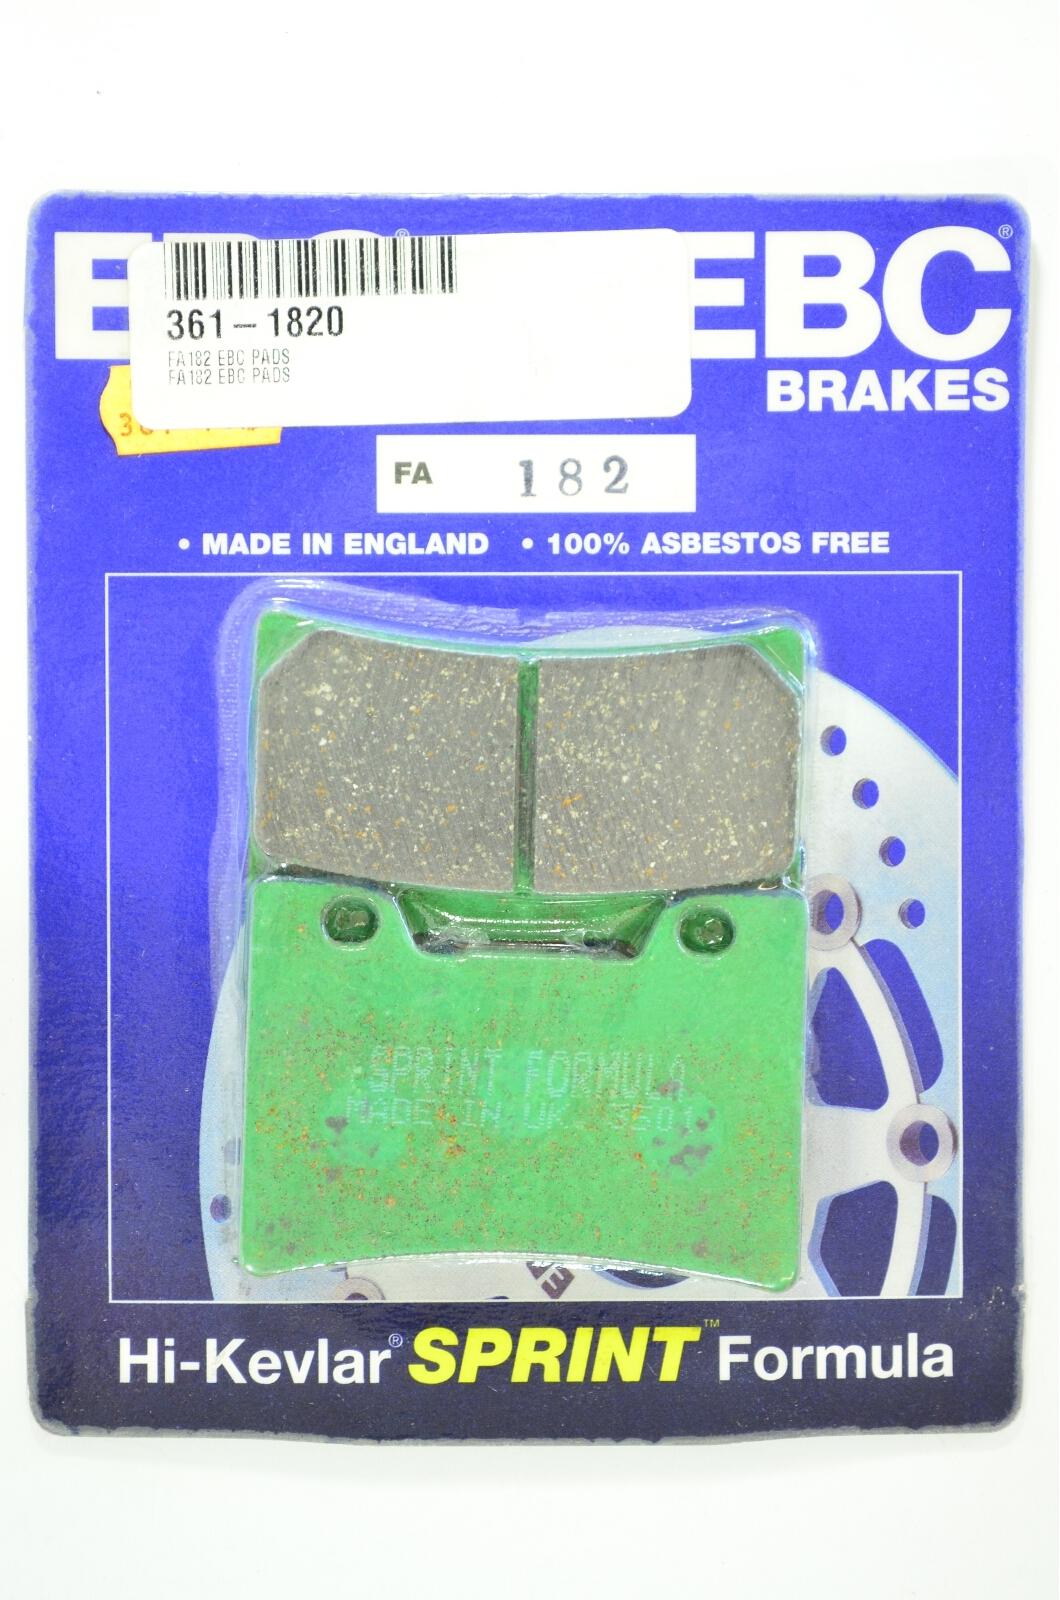 Standard Organic Front Brake Pads Set For 91-93 Yamaha FZR1000 - Replaces Yamaha 3GM-W0045-50-00 or 3GM-W0045-60-00 - Click Image to Close